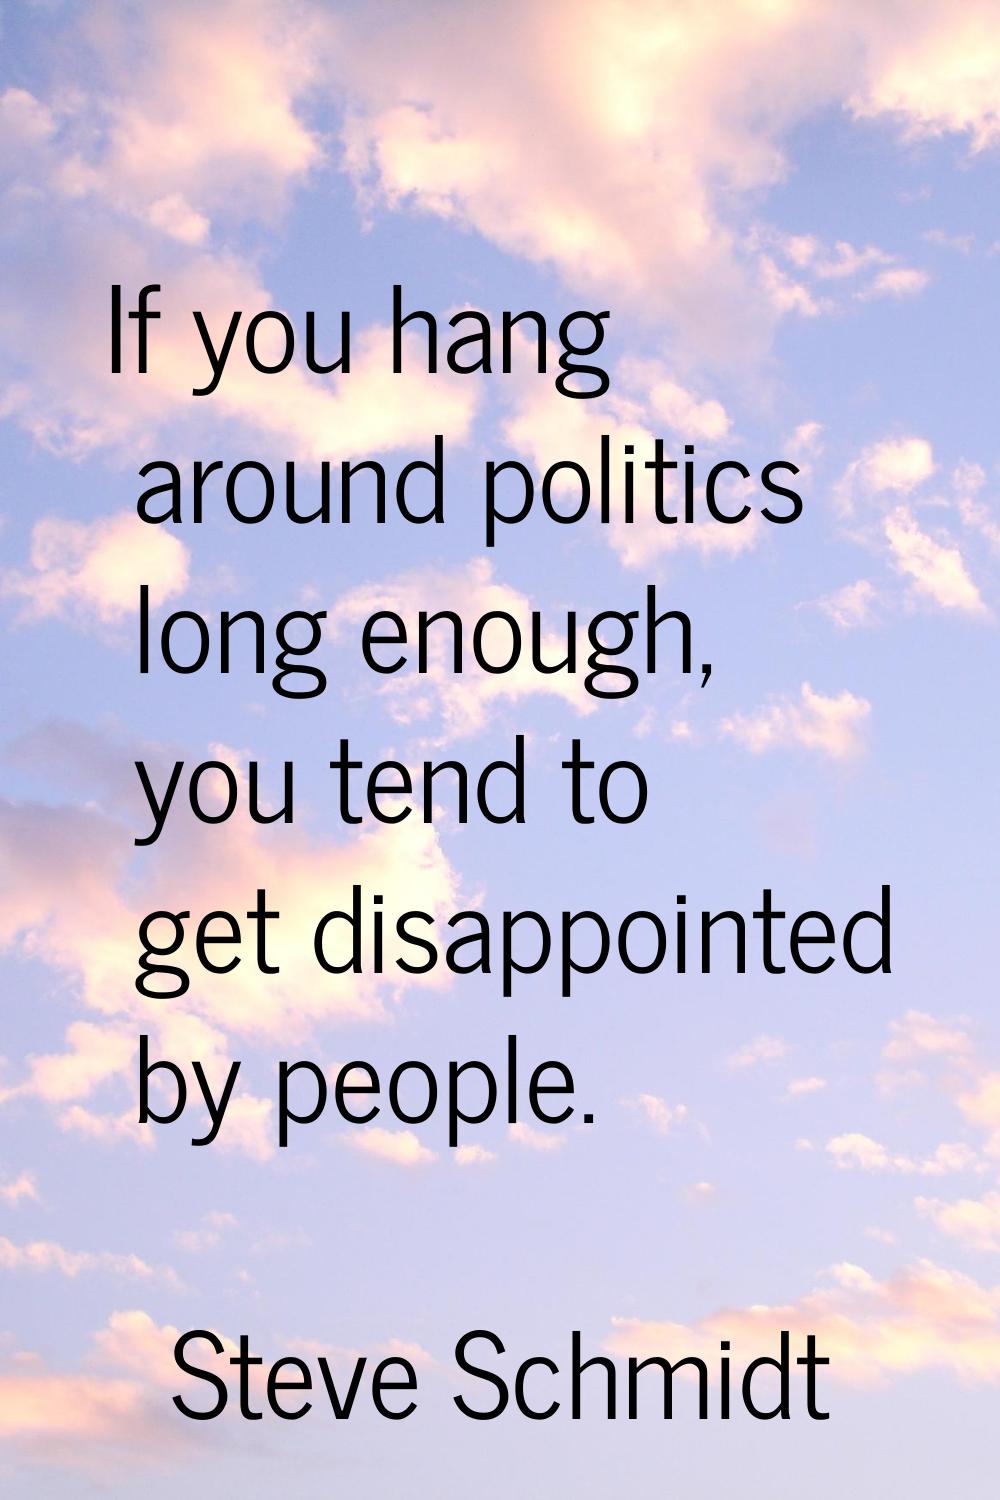 If you hang around politics long enough, you tend to get disappointed by people.